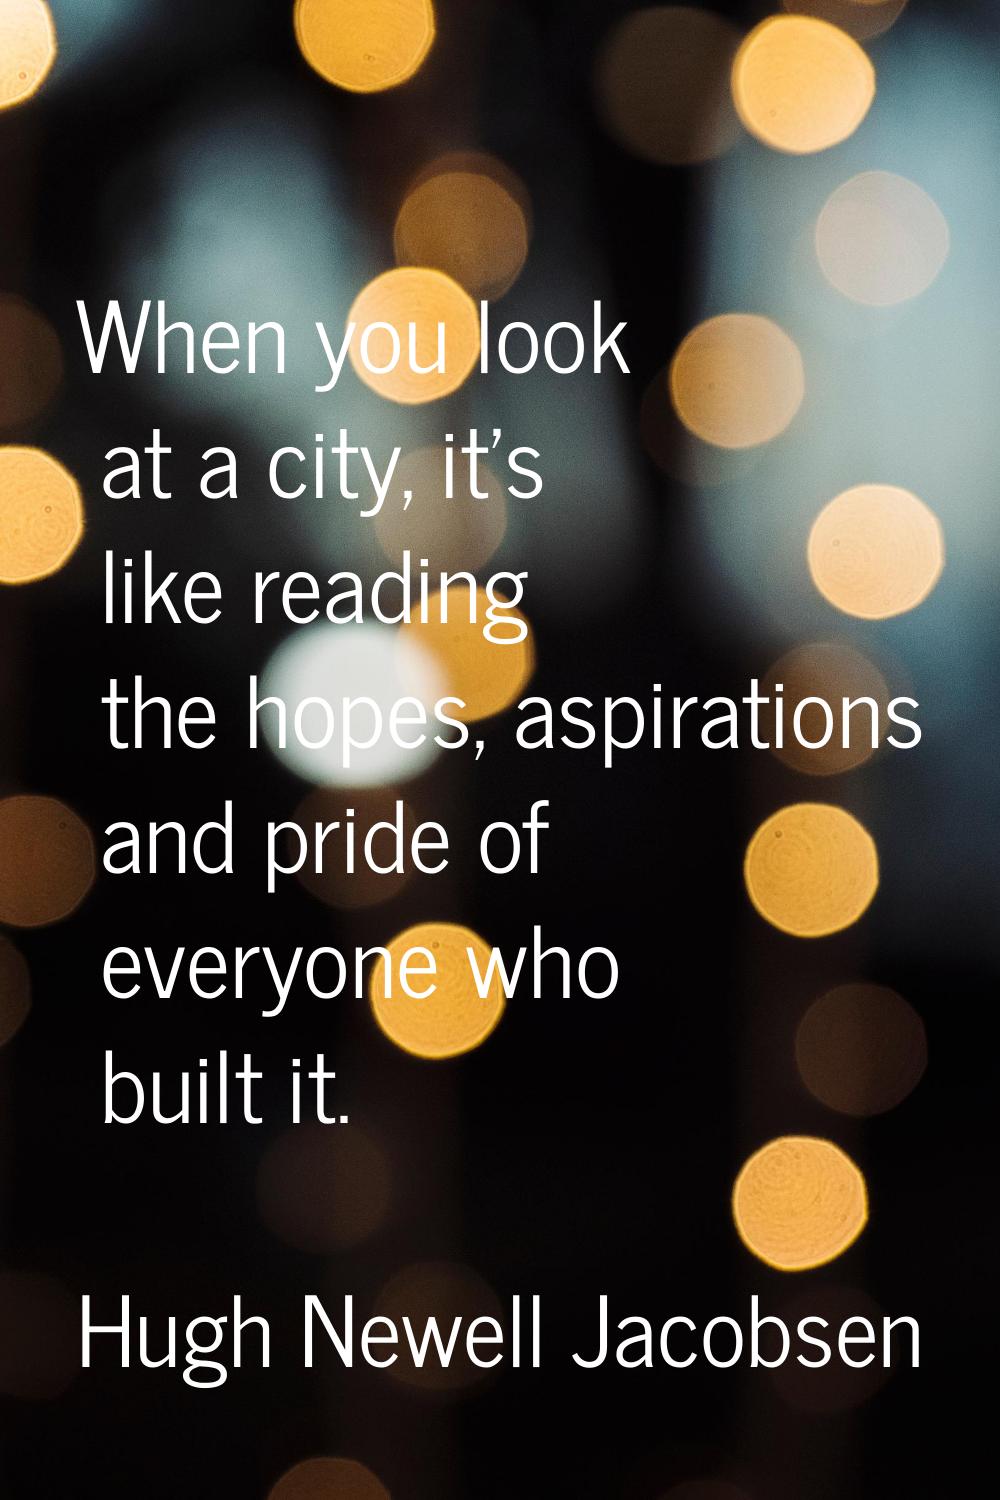 When you look at a city, it's like reading the hopes, aspirations and pride of everyone who built i